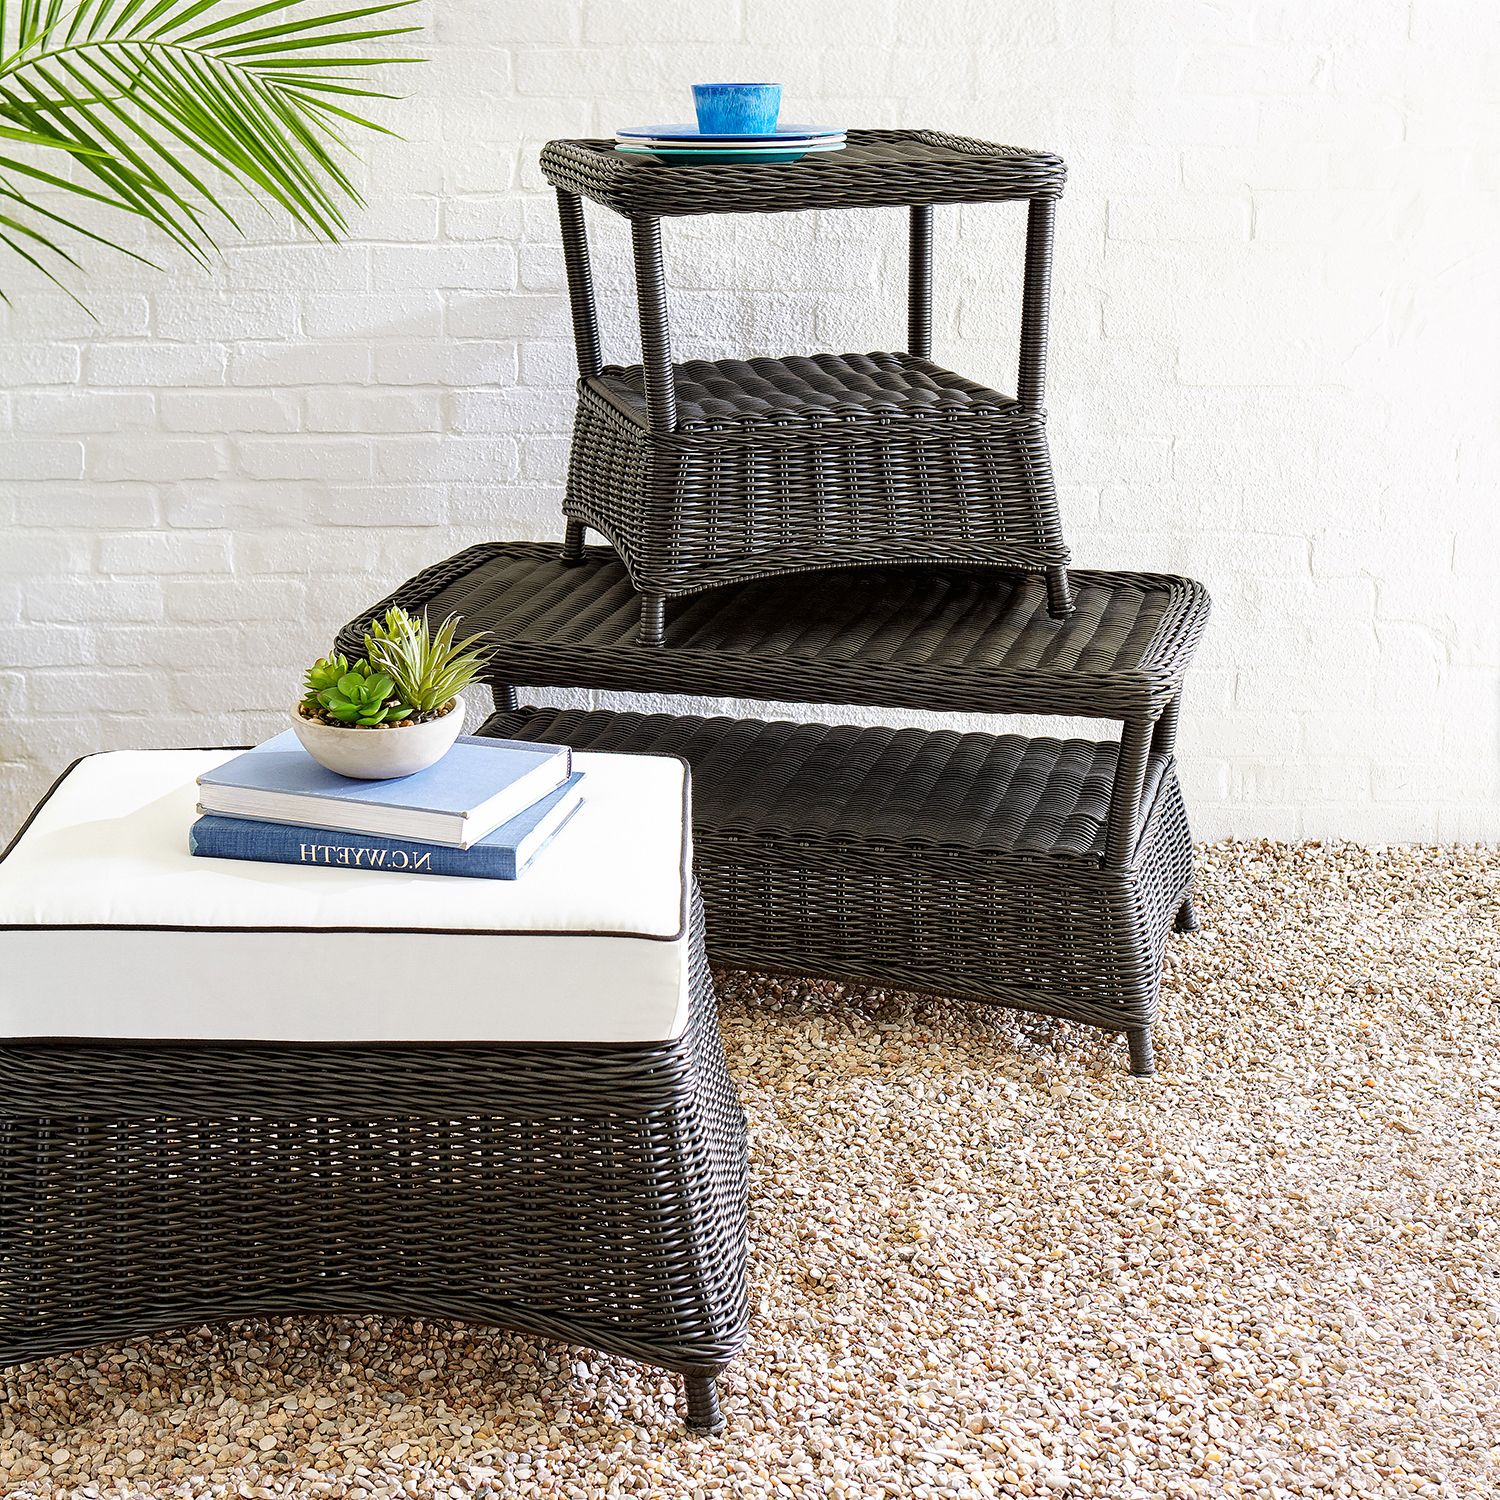 Black Wicker Coffee Table – Pier1 With Regard To 2019 Wicker Coffee Tables (View 1 of 20)